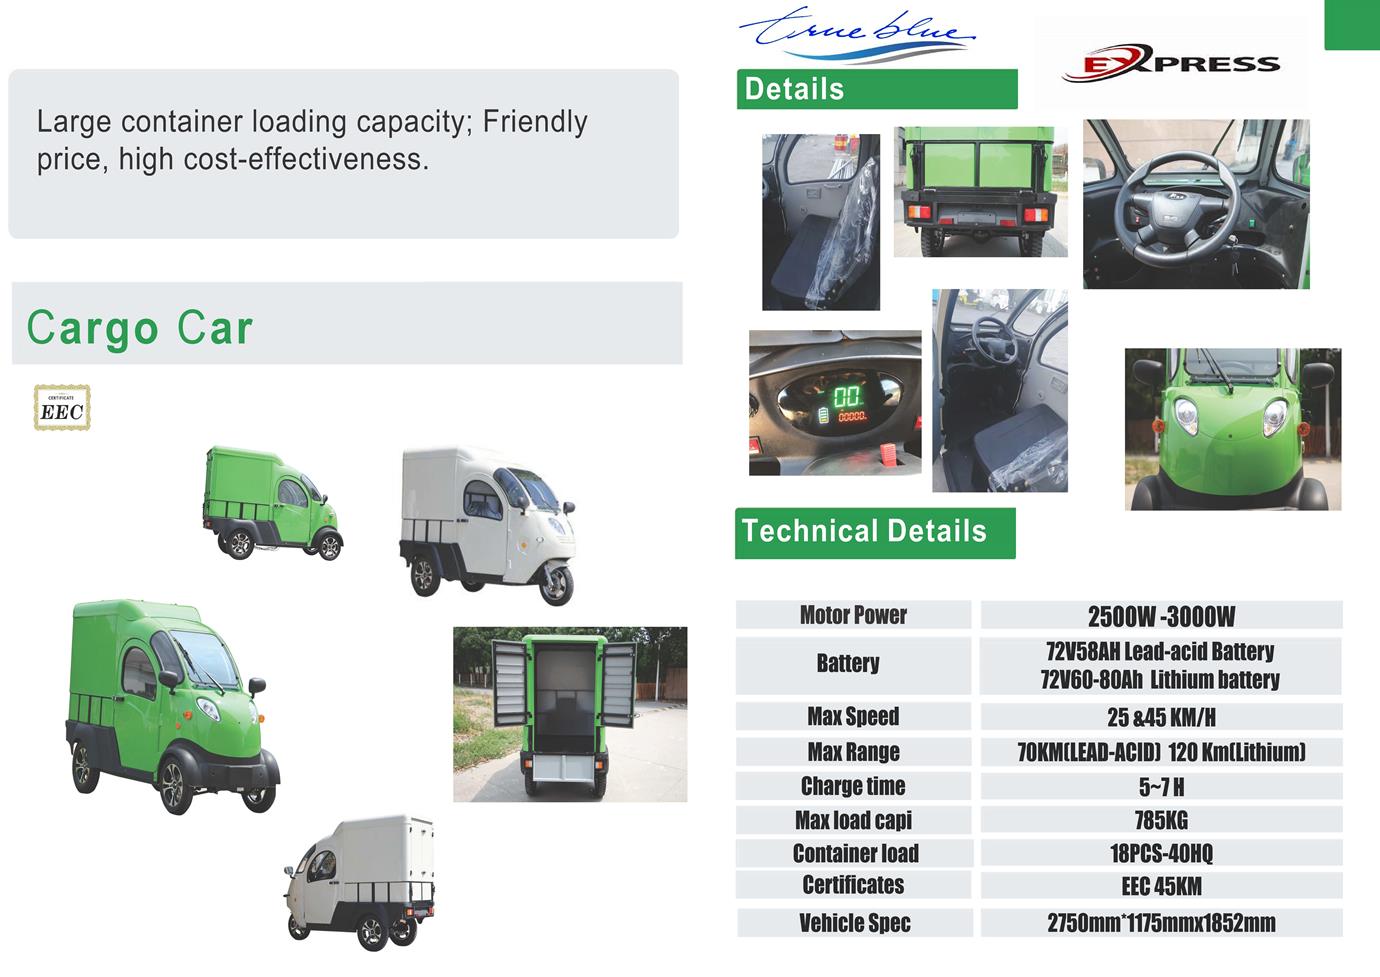 Smaller body but big space,Electric truck car with EEC certification